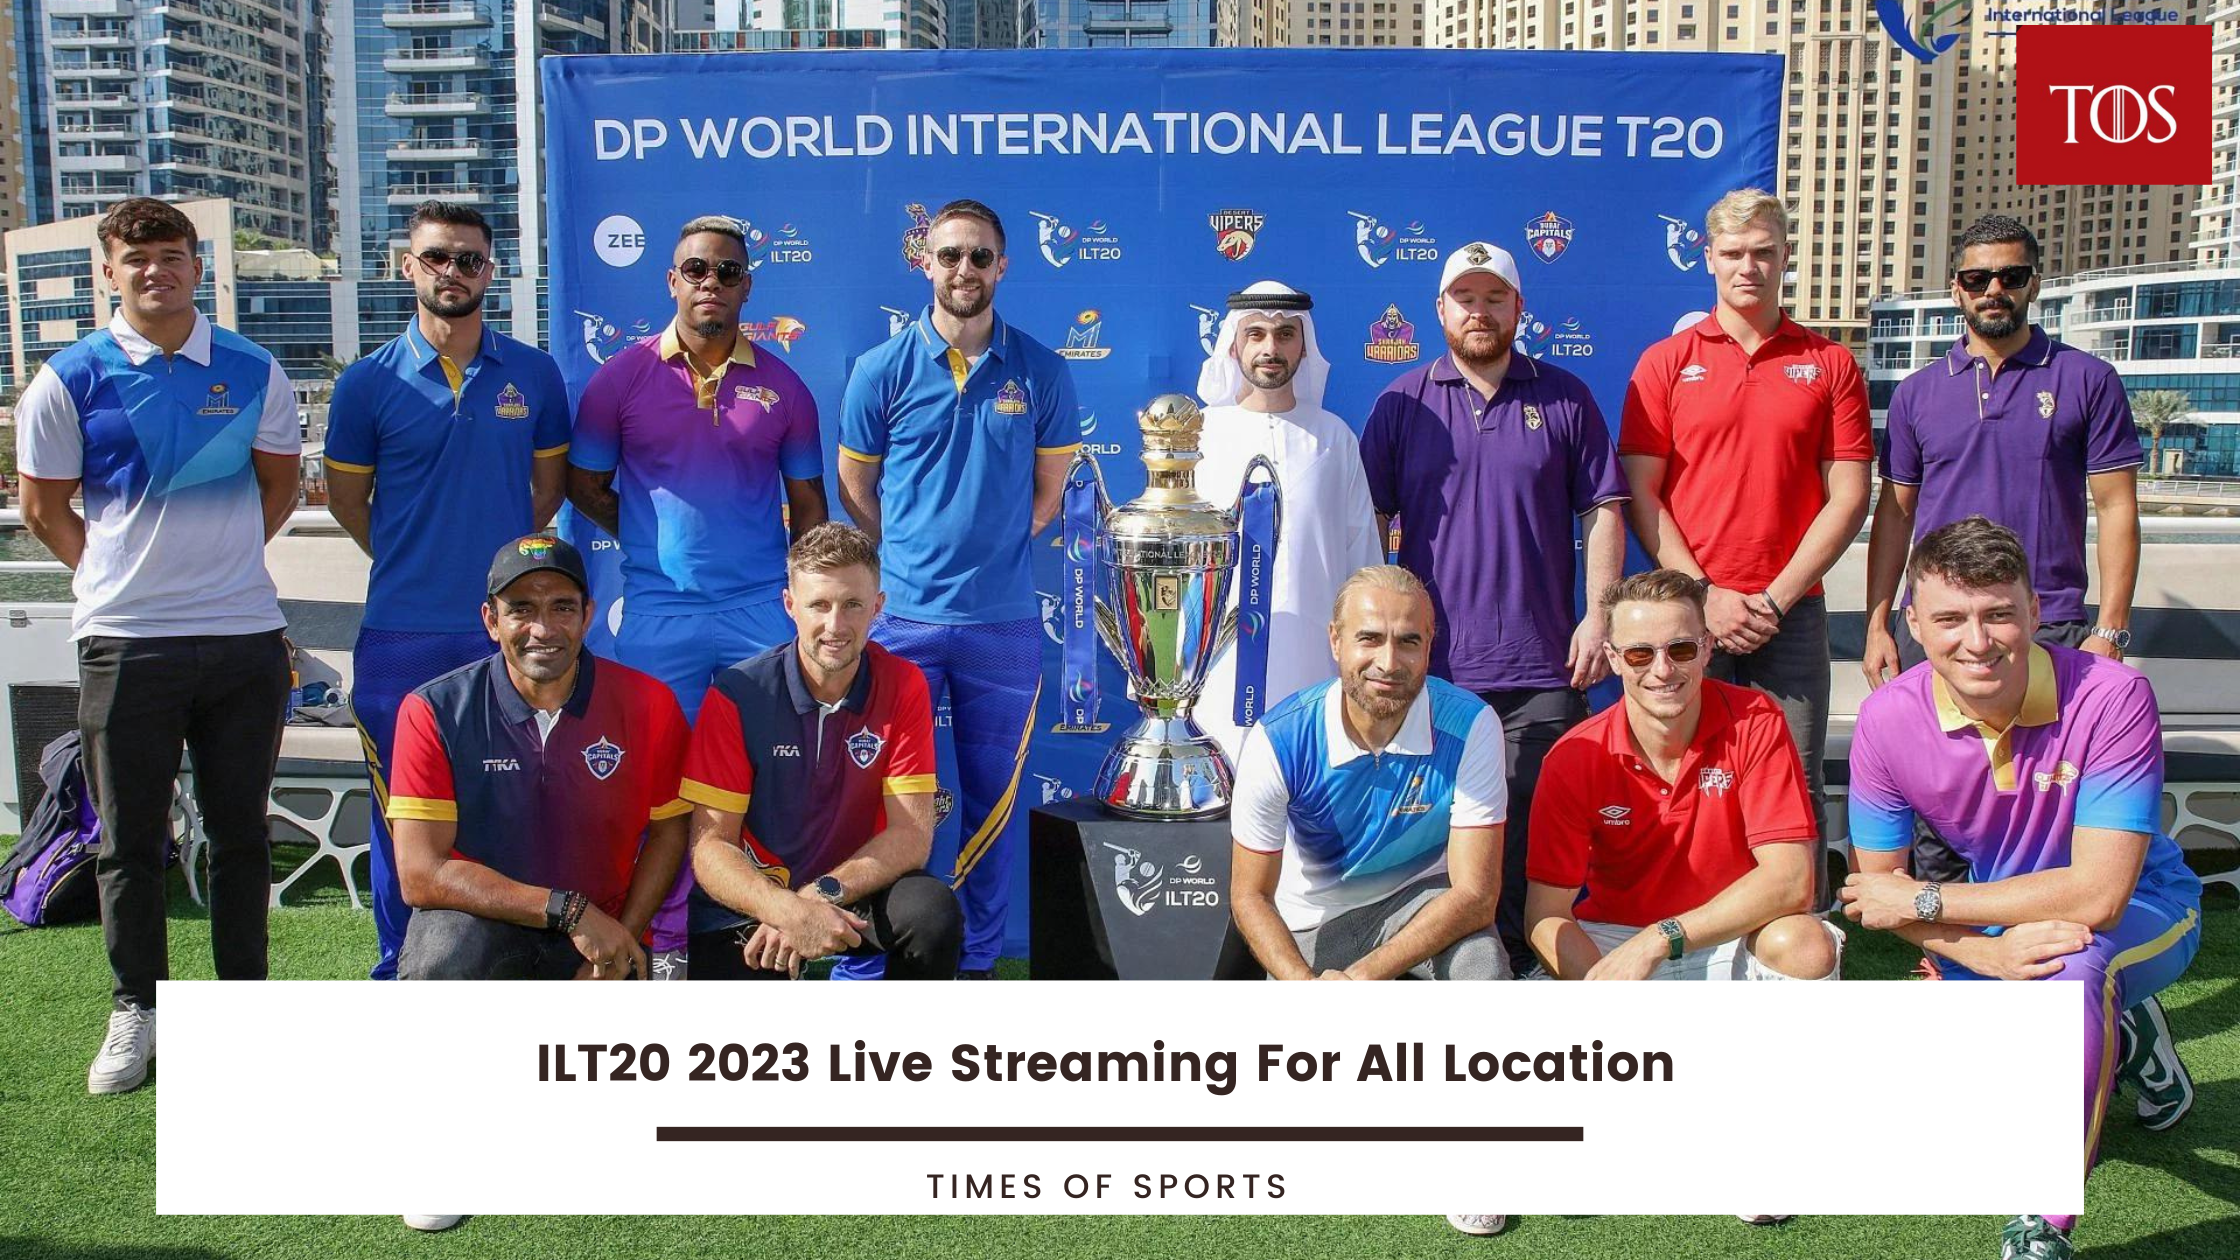 ILT20 2023 Live Streaming For All Location